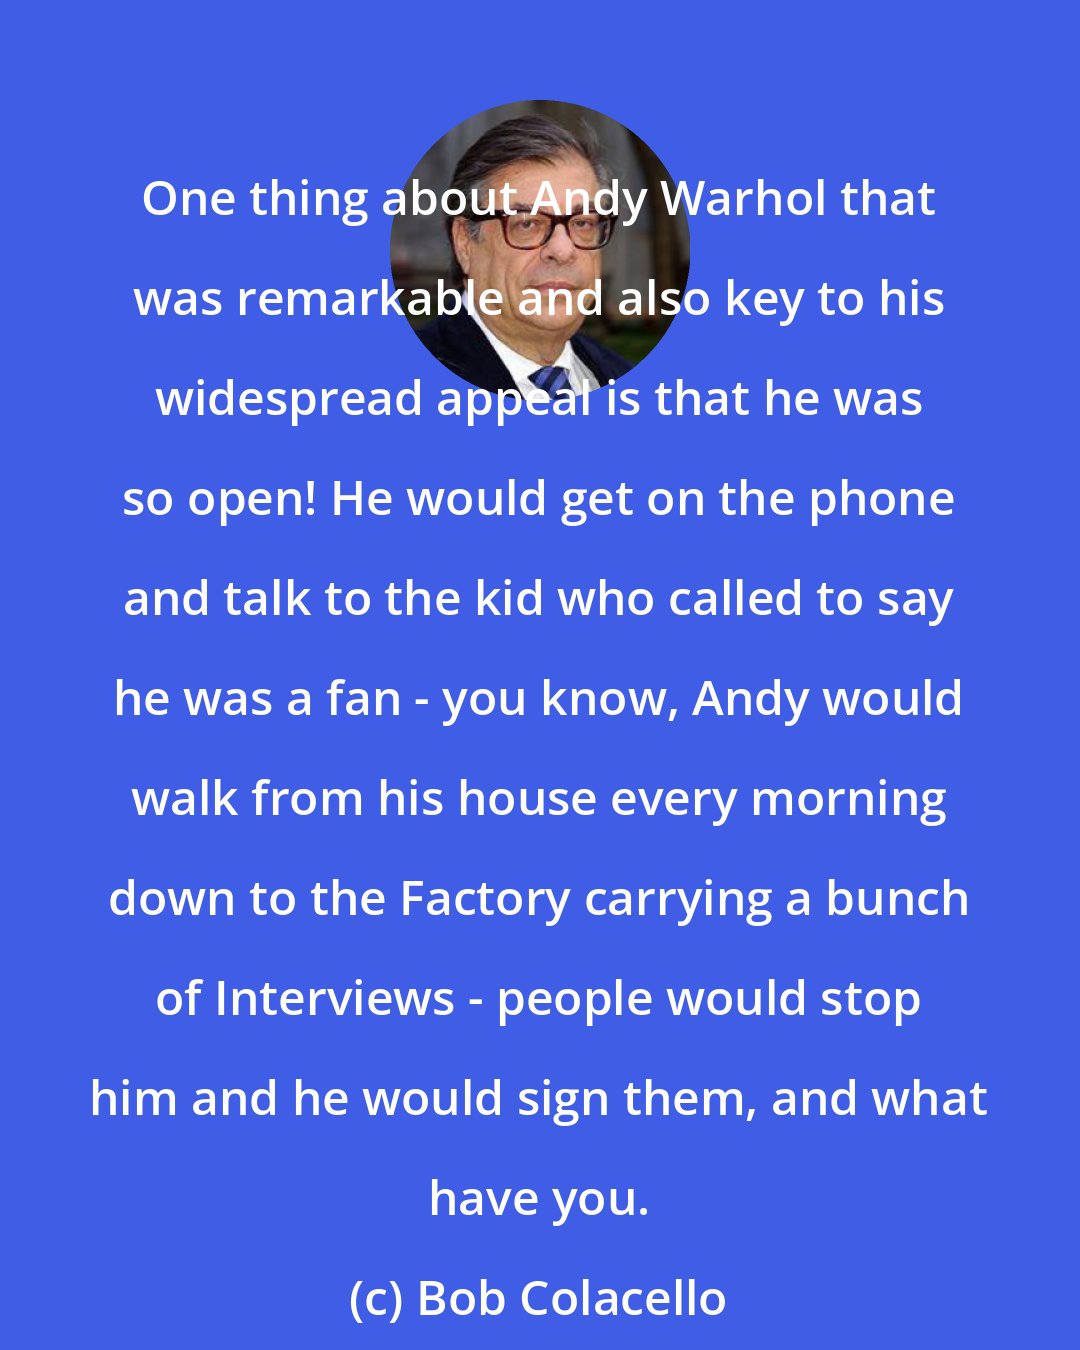 Bob Colacello: One thing about Andy Warhol that was remarkable and also key to his widespread appeal is that he was so open! He would get on the phone and talk to the kid who called to say he was a fan - you know, Andy would walk from his house every morning down to the Factory carrying a bunch of Interviews - people would stop him and he would sign them, and what have you.